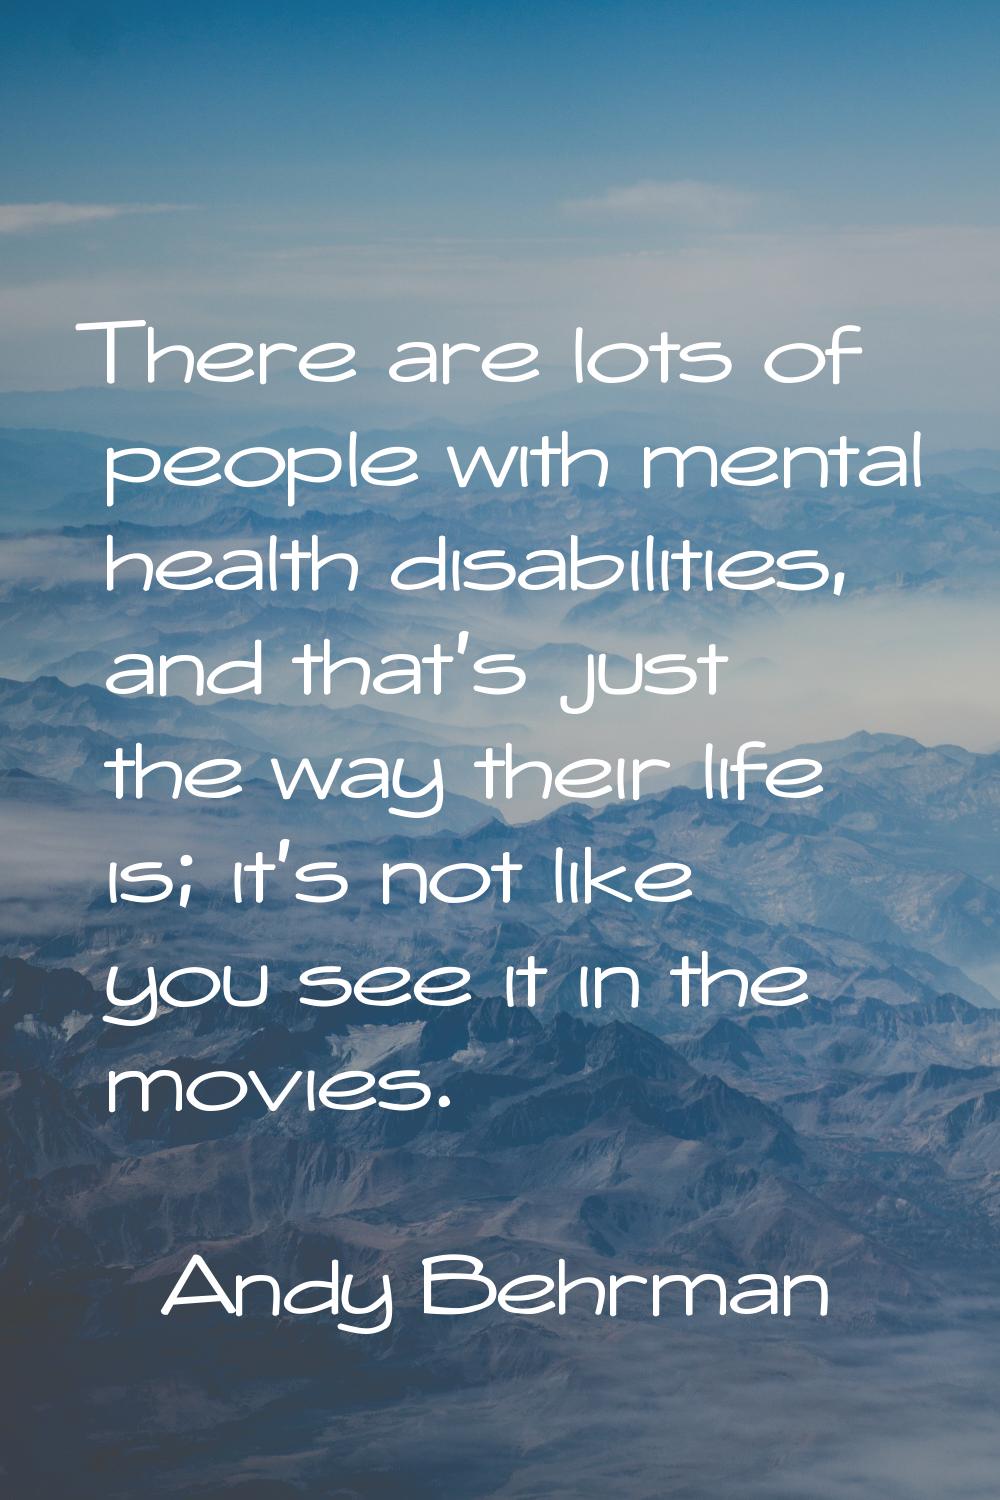 There are lots of people with mental health disabilities, and that's just the way their life is; it